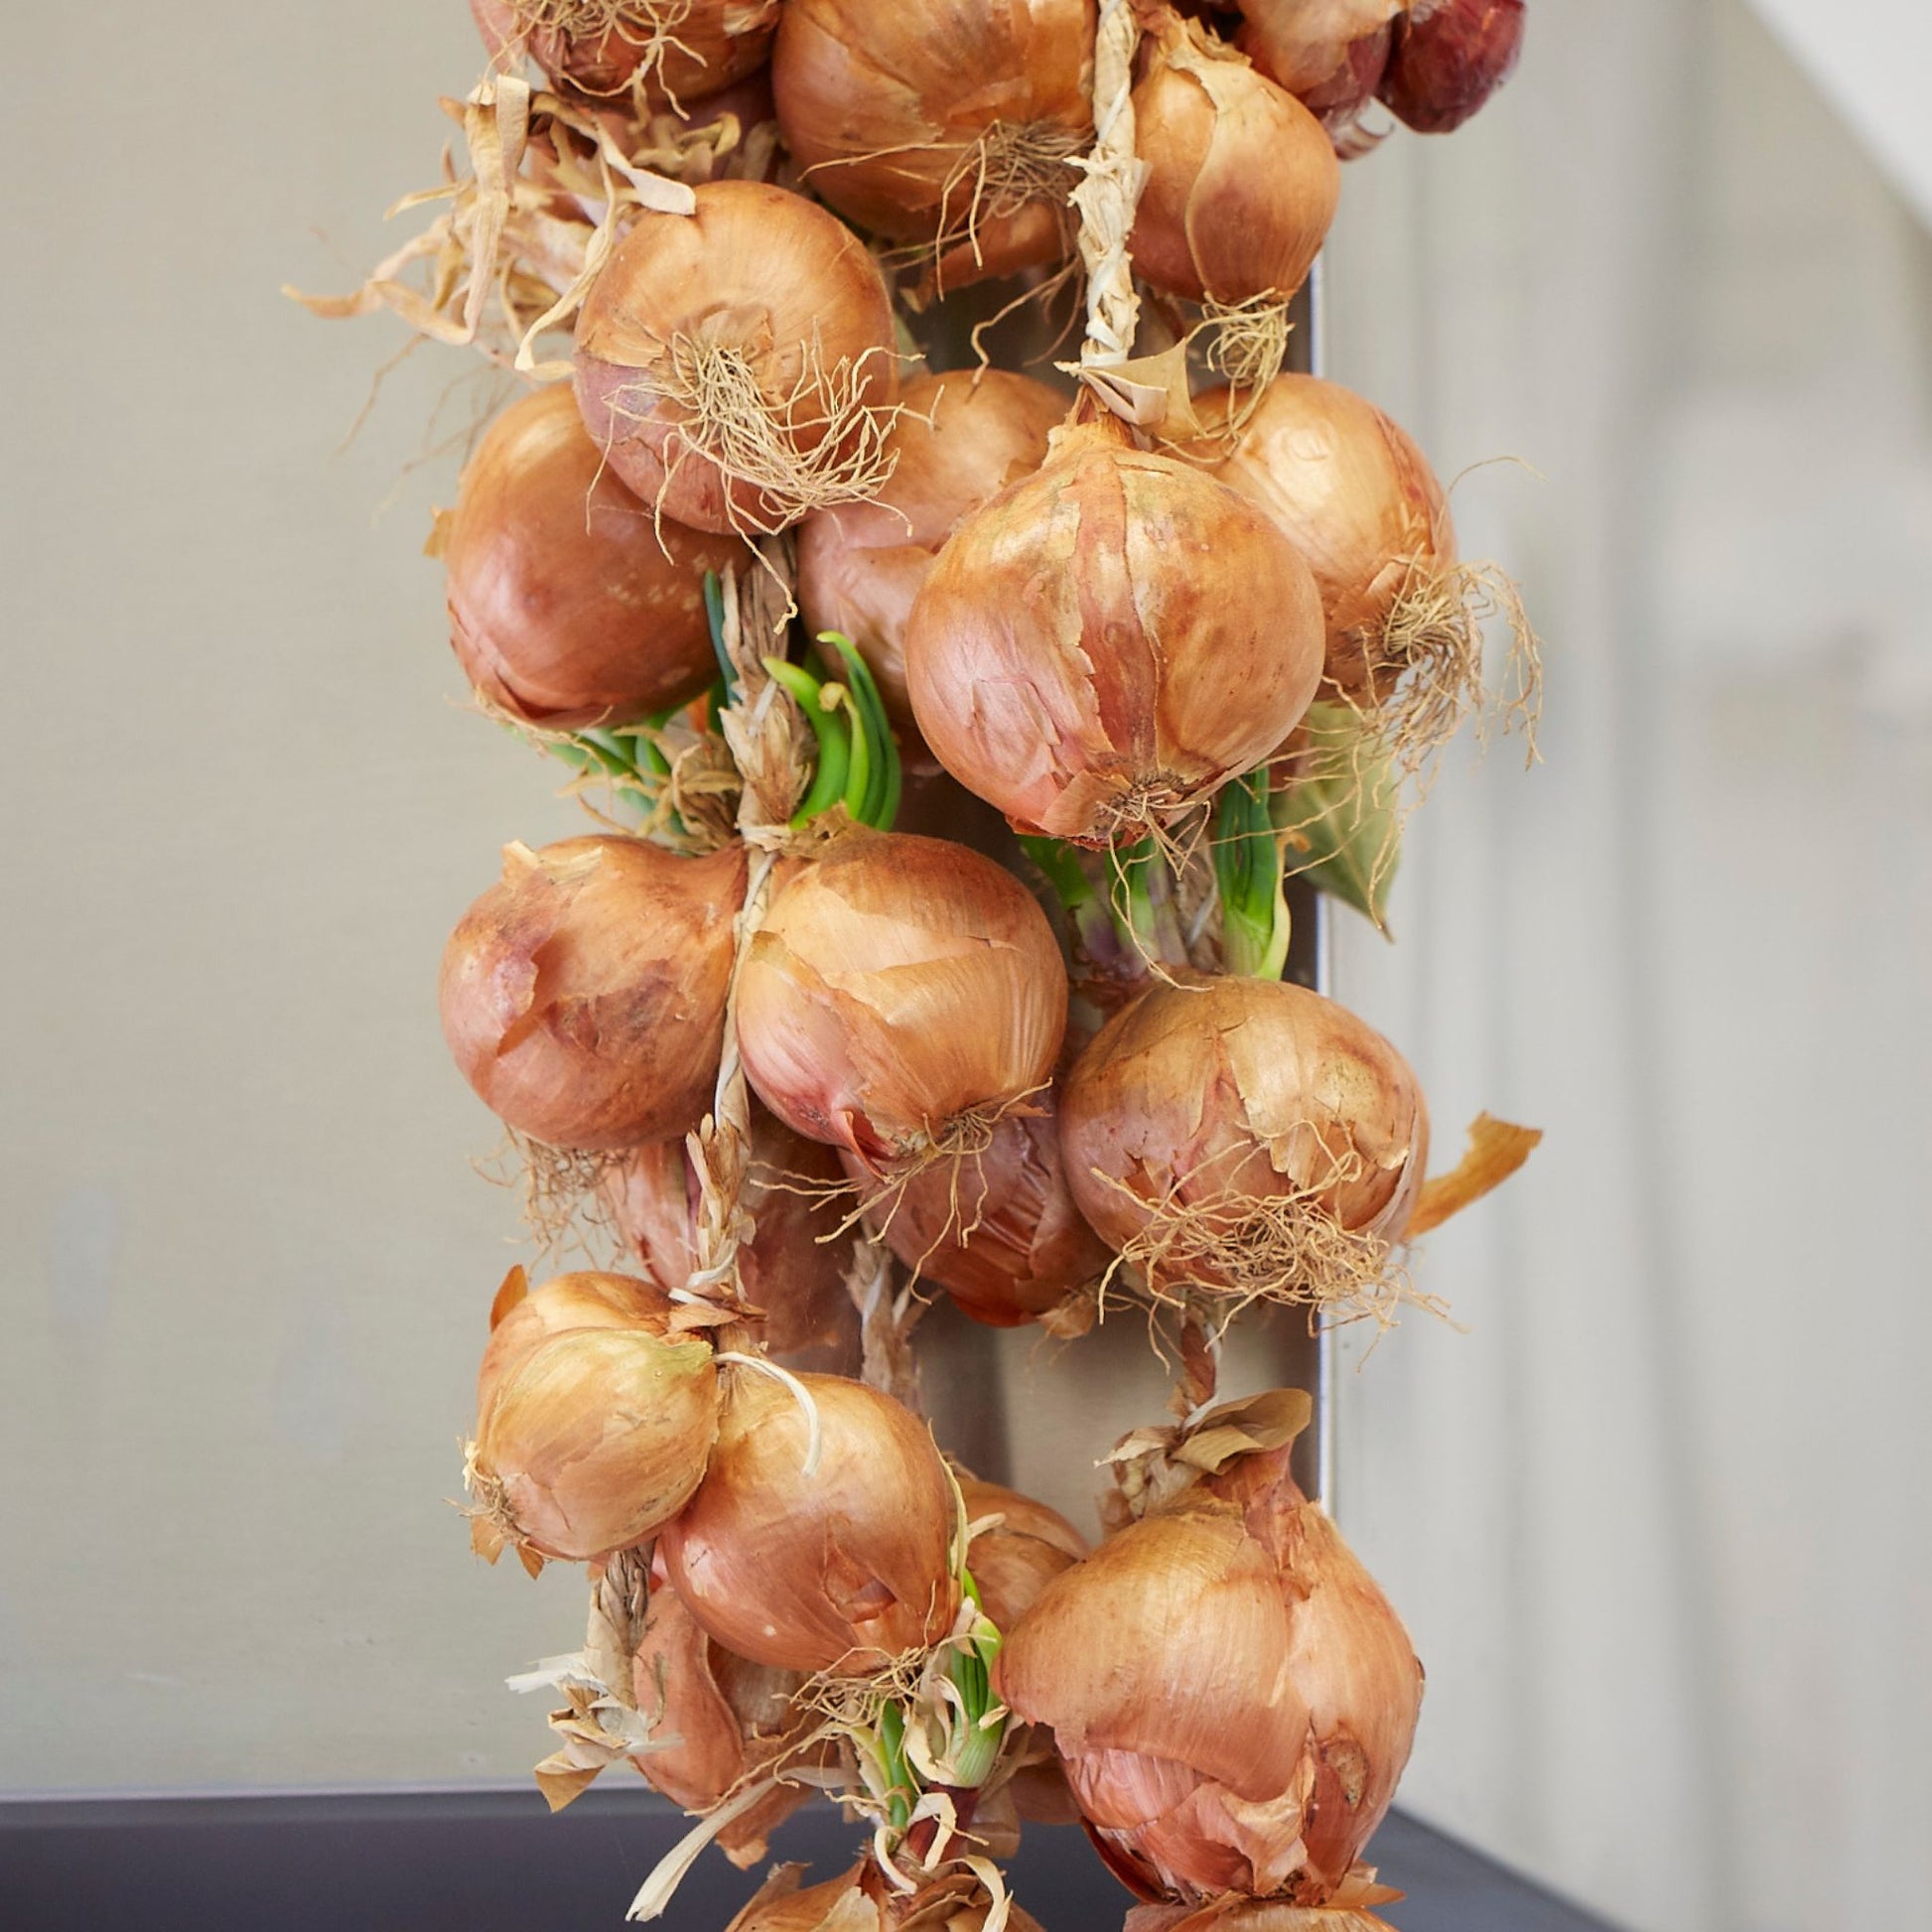 Onions hanging down on a string